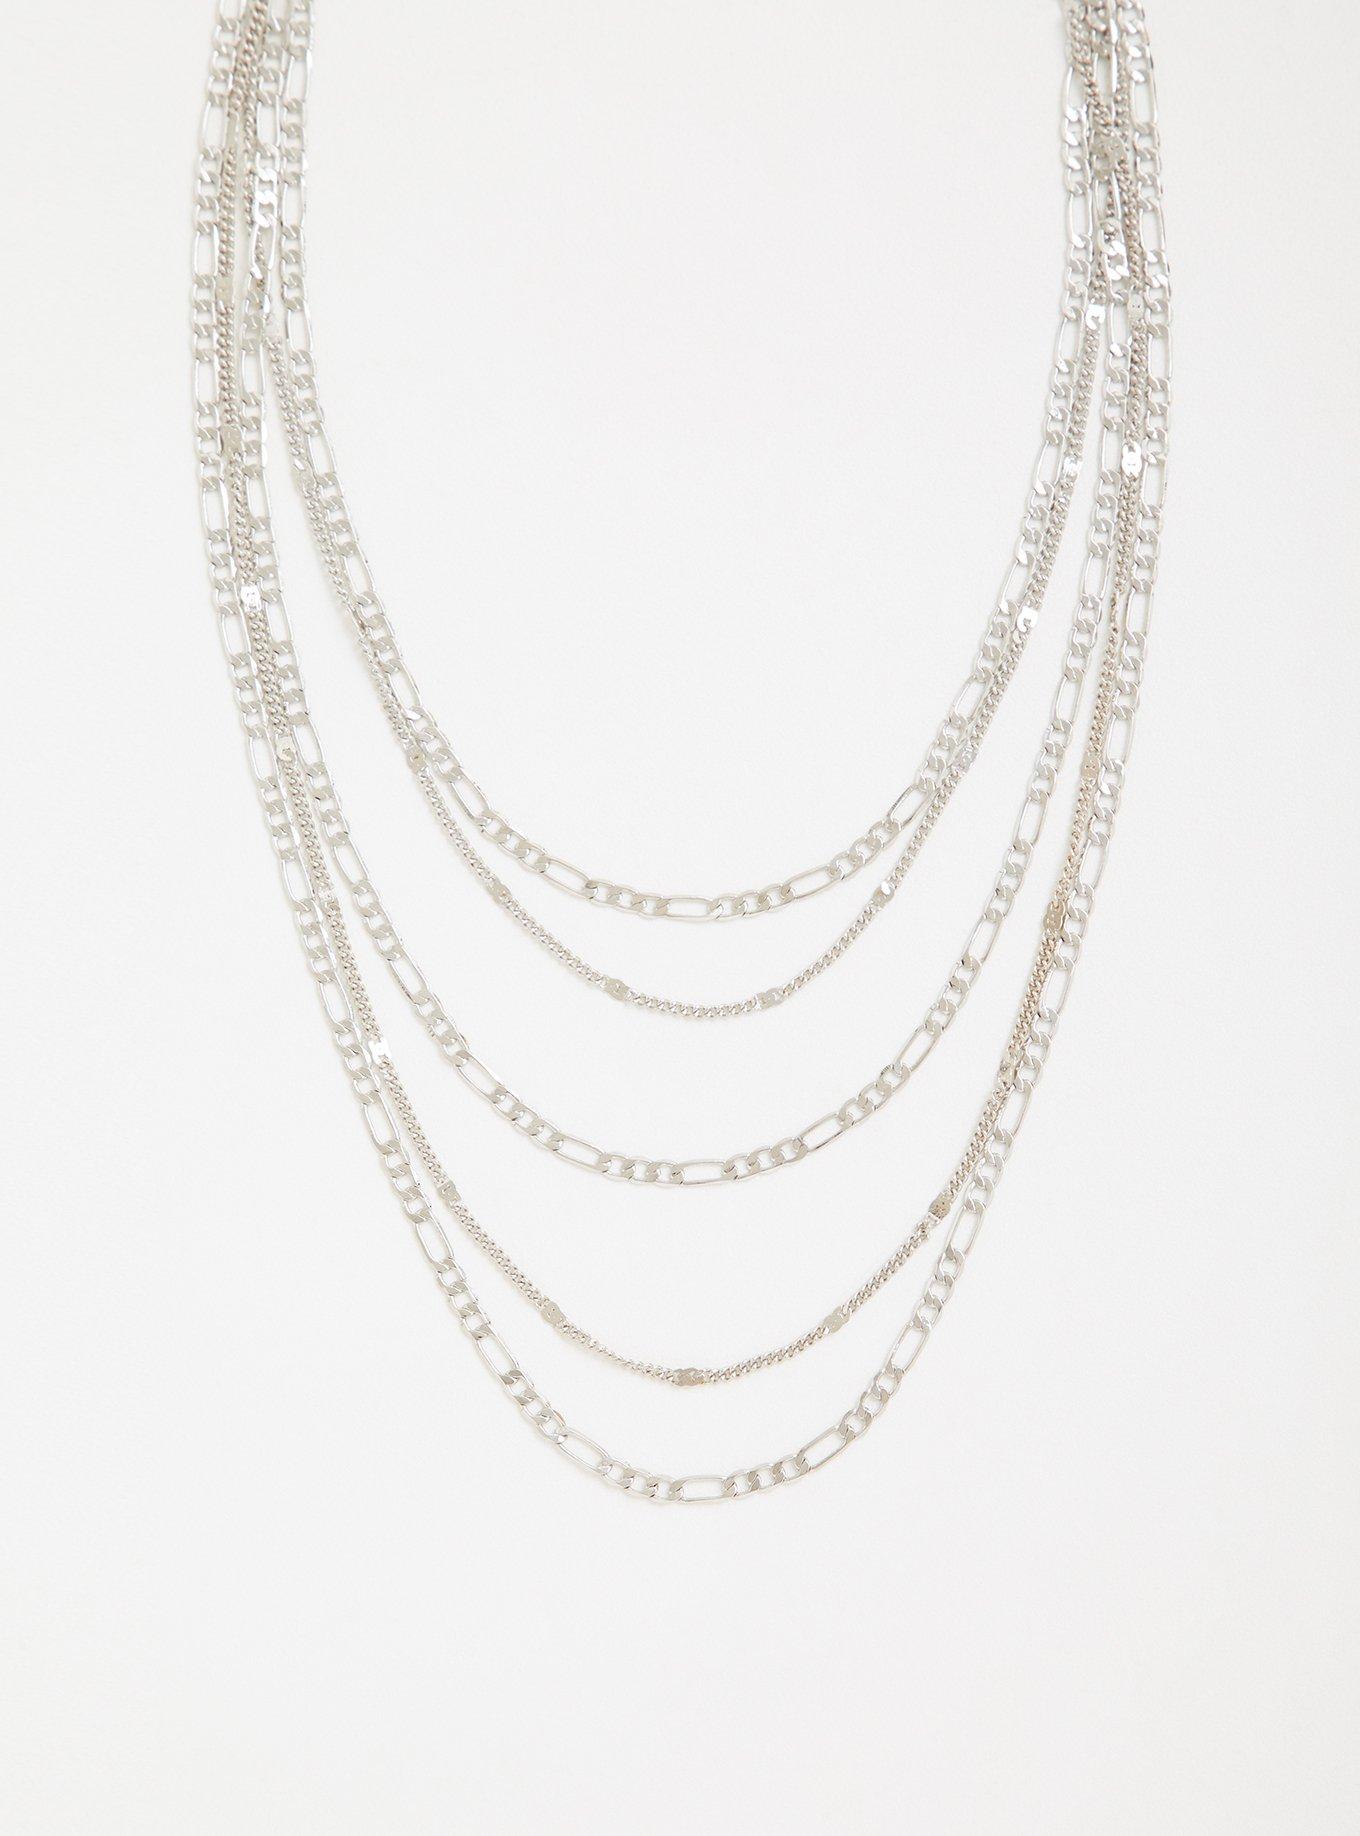 Plus Size - Silver Layer Chain Necklace - Torrid